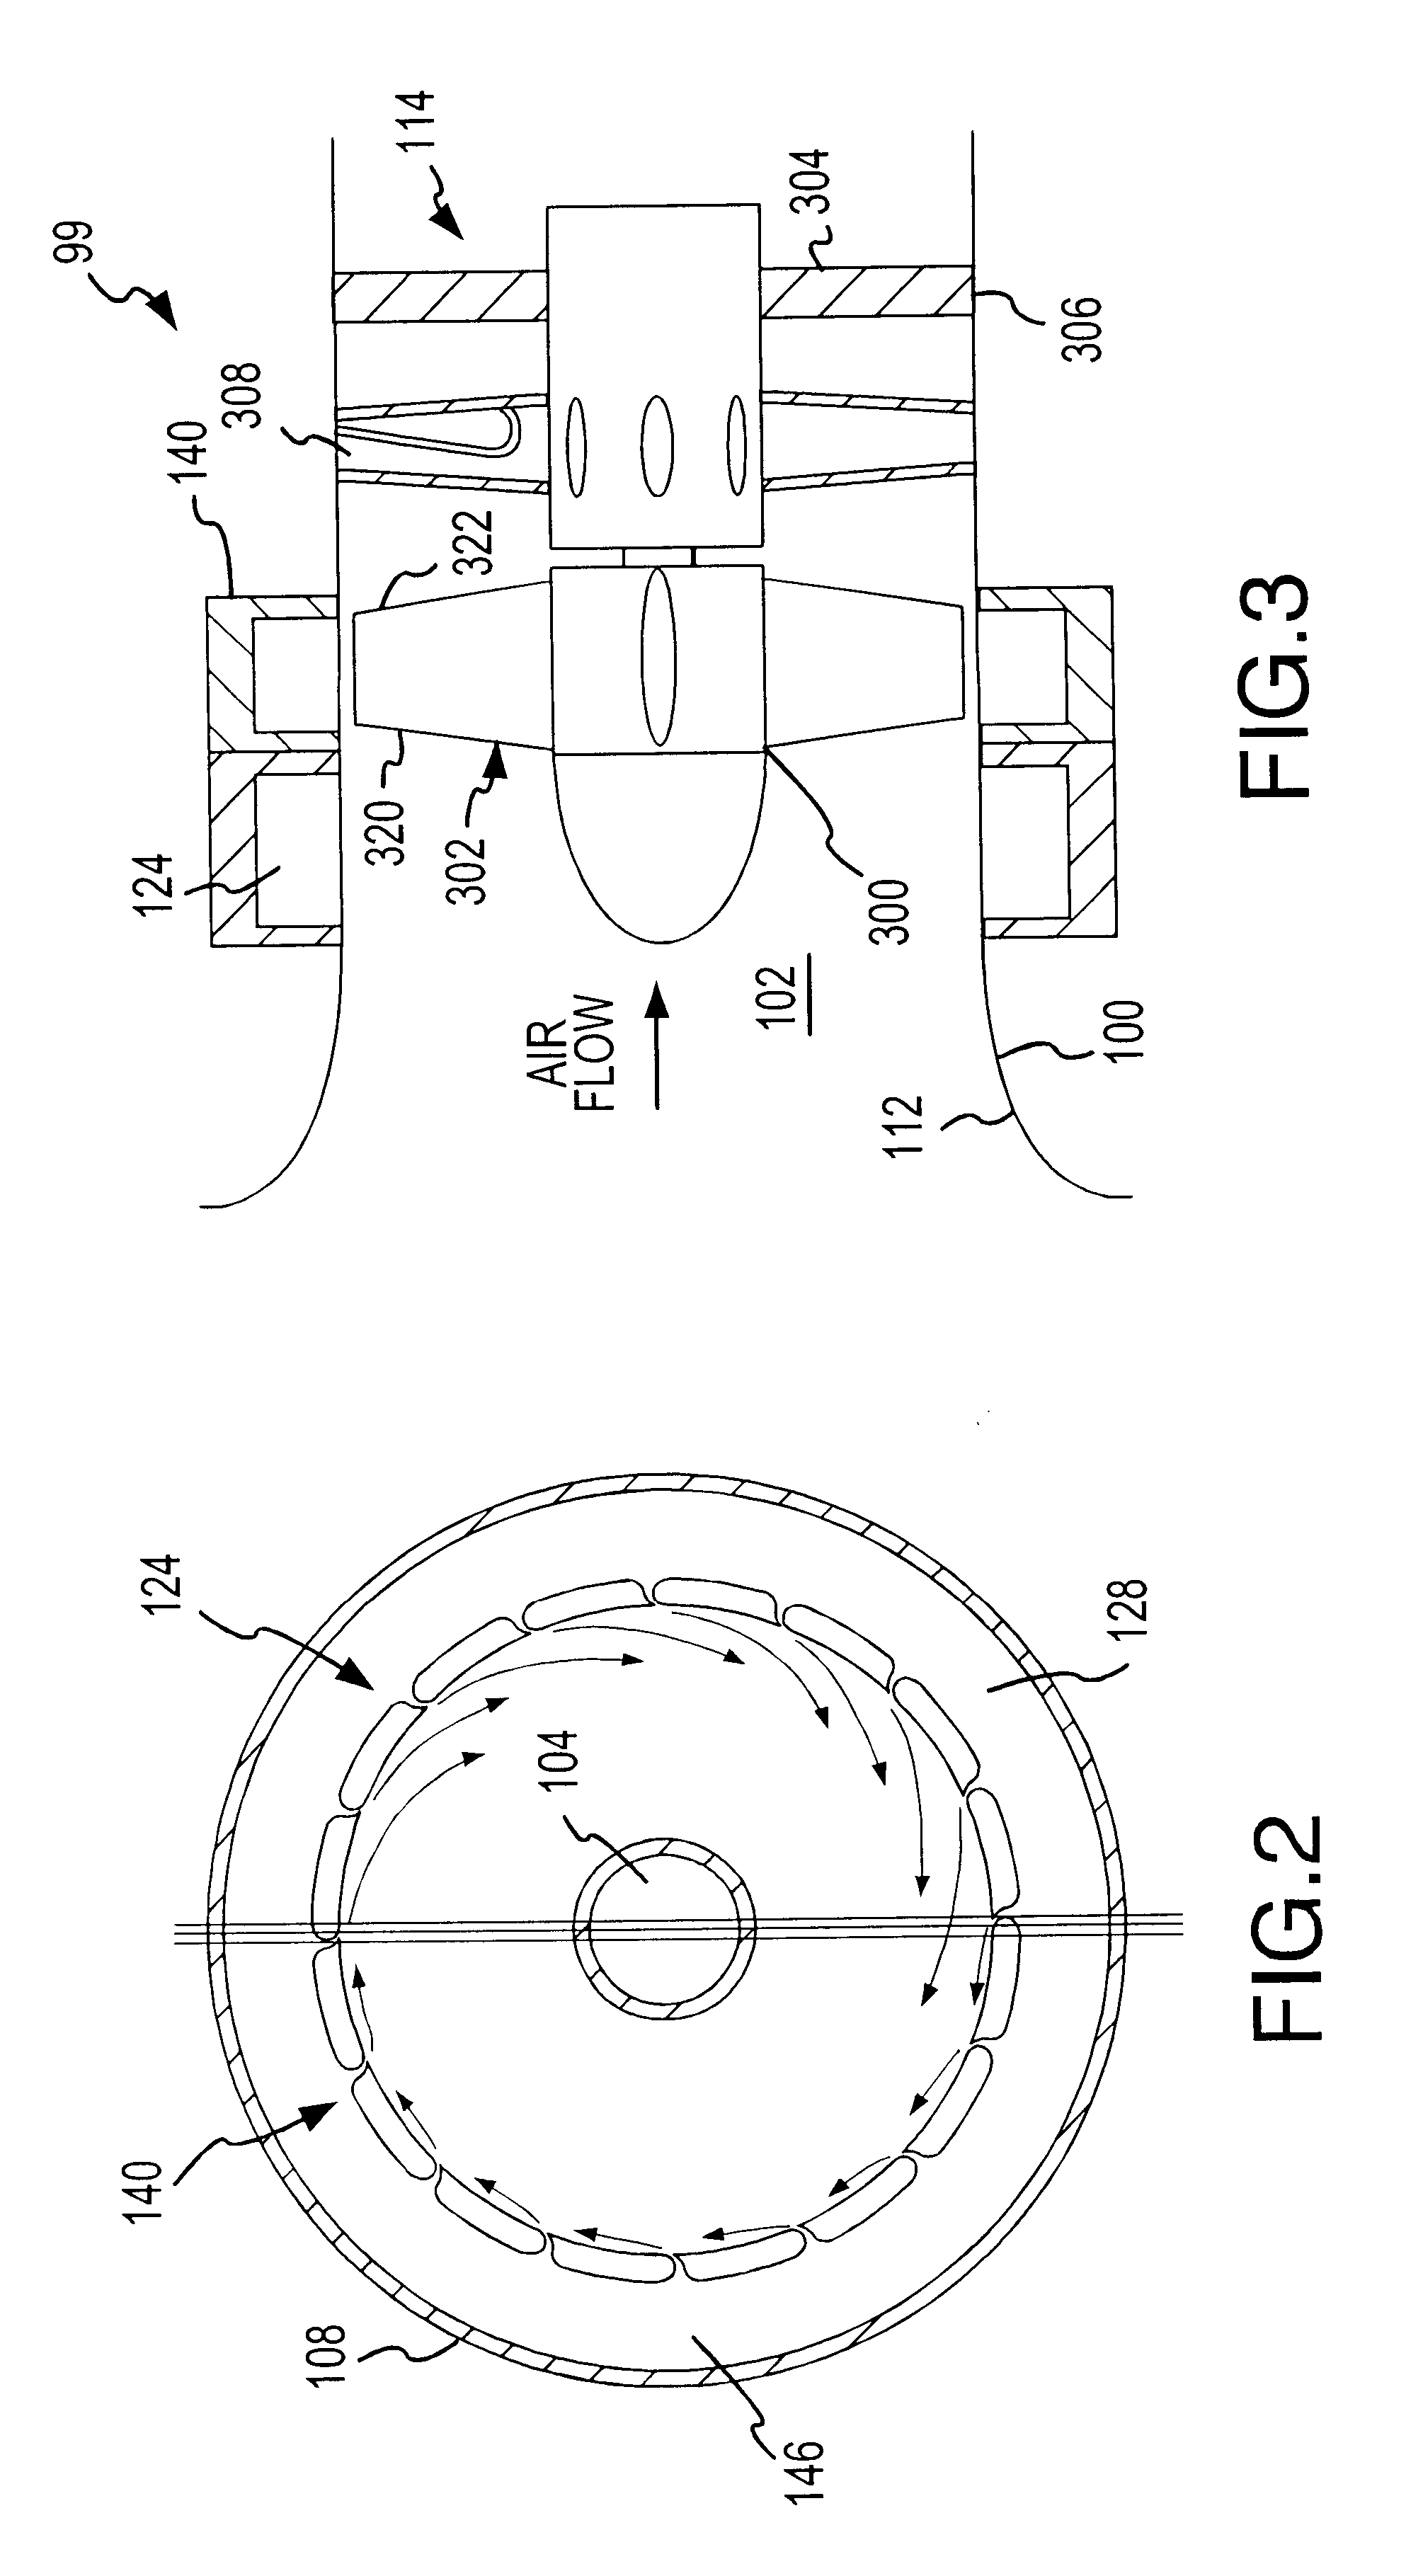 Method and apparatus for a fan noise controller